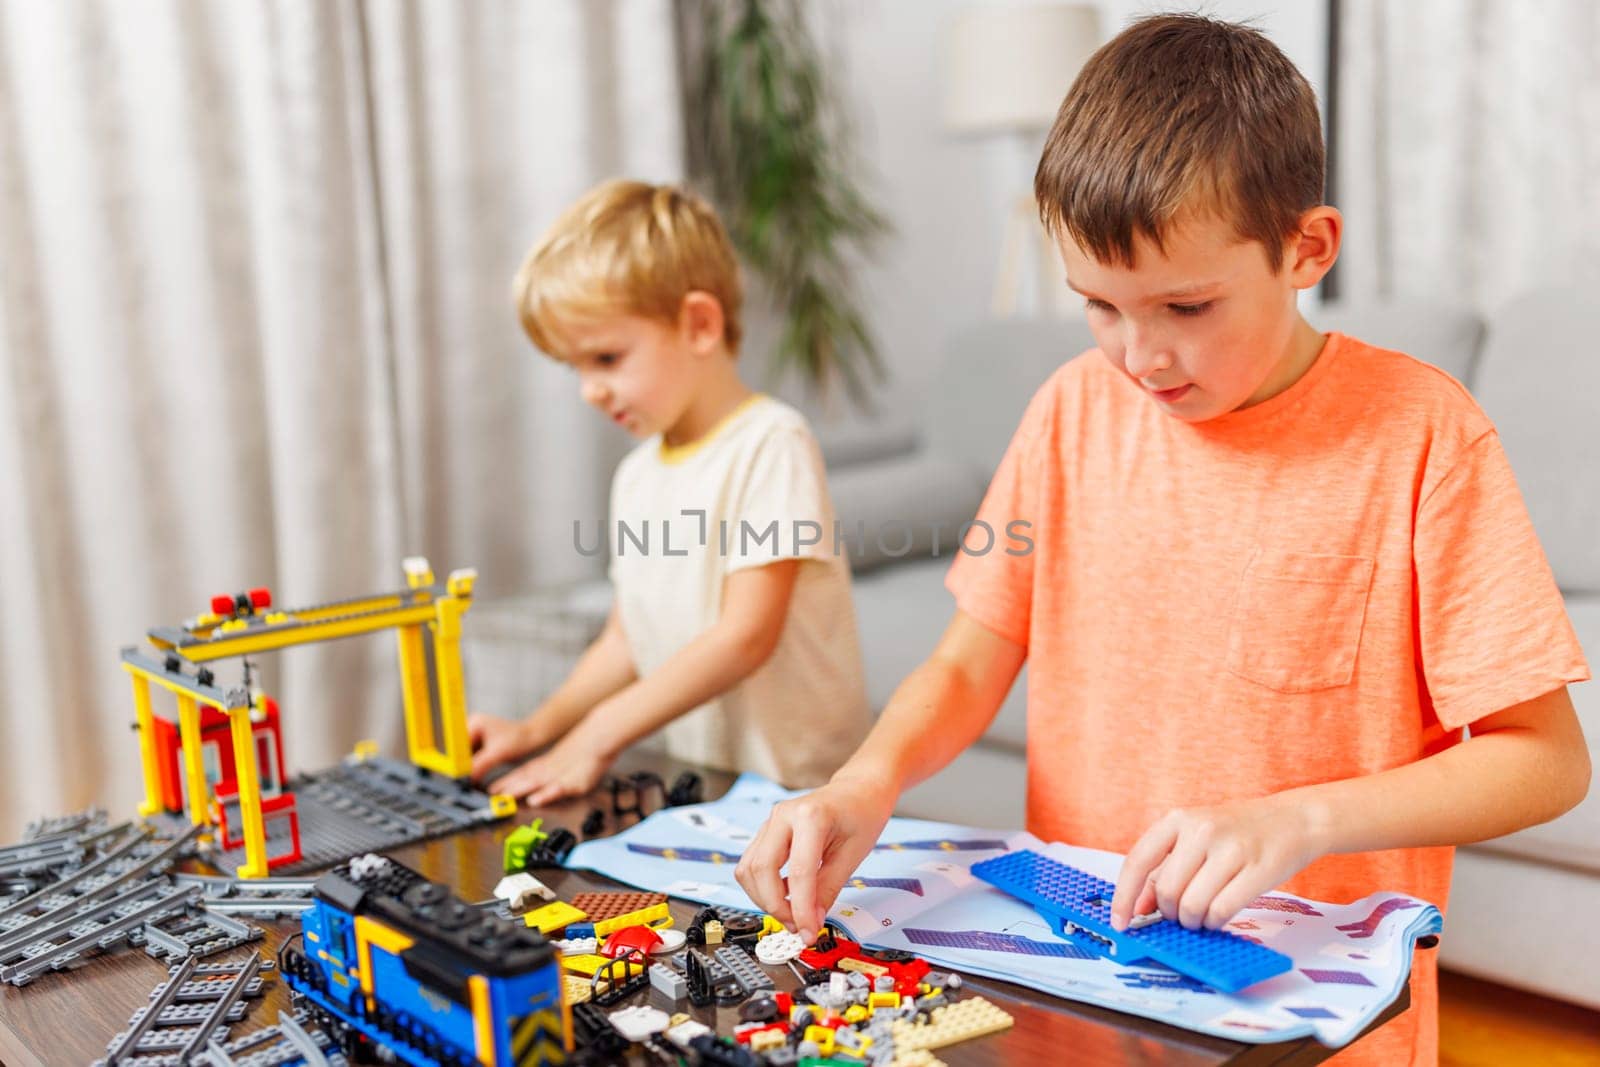 Two children playing and building with colorful plastic bricks at the table. Early learning and development.